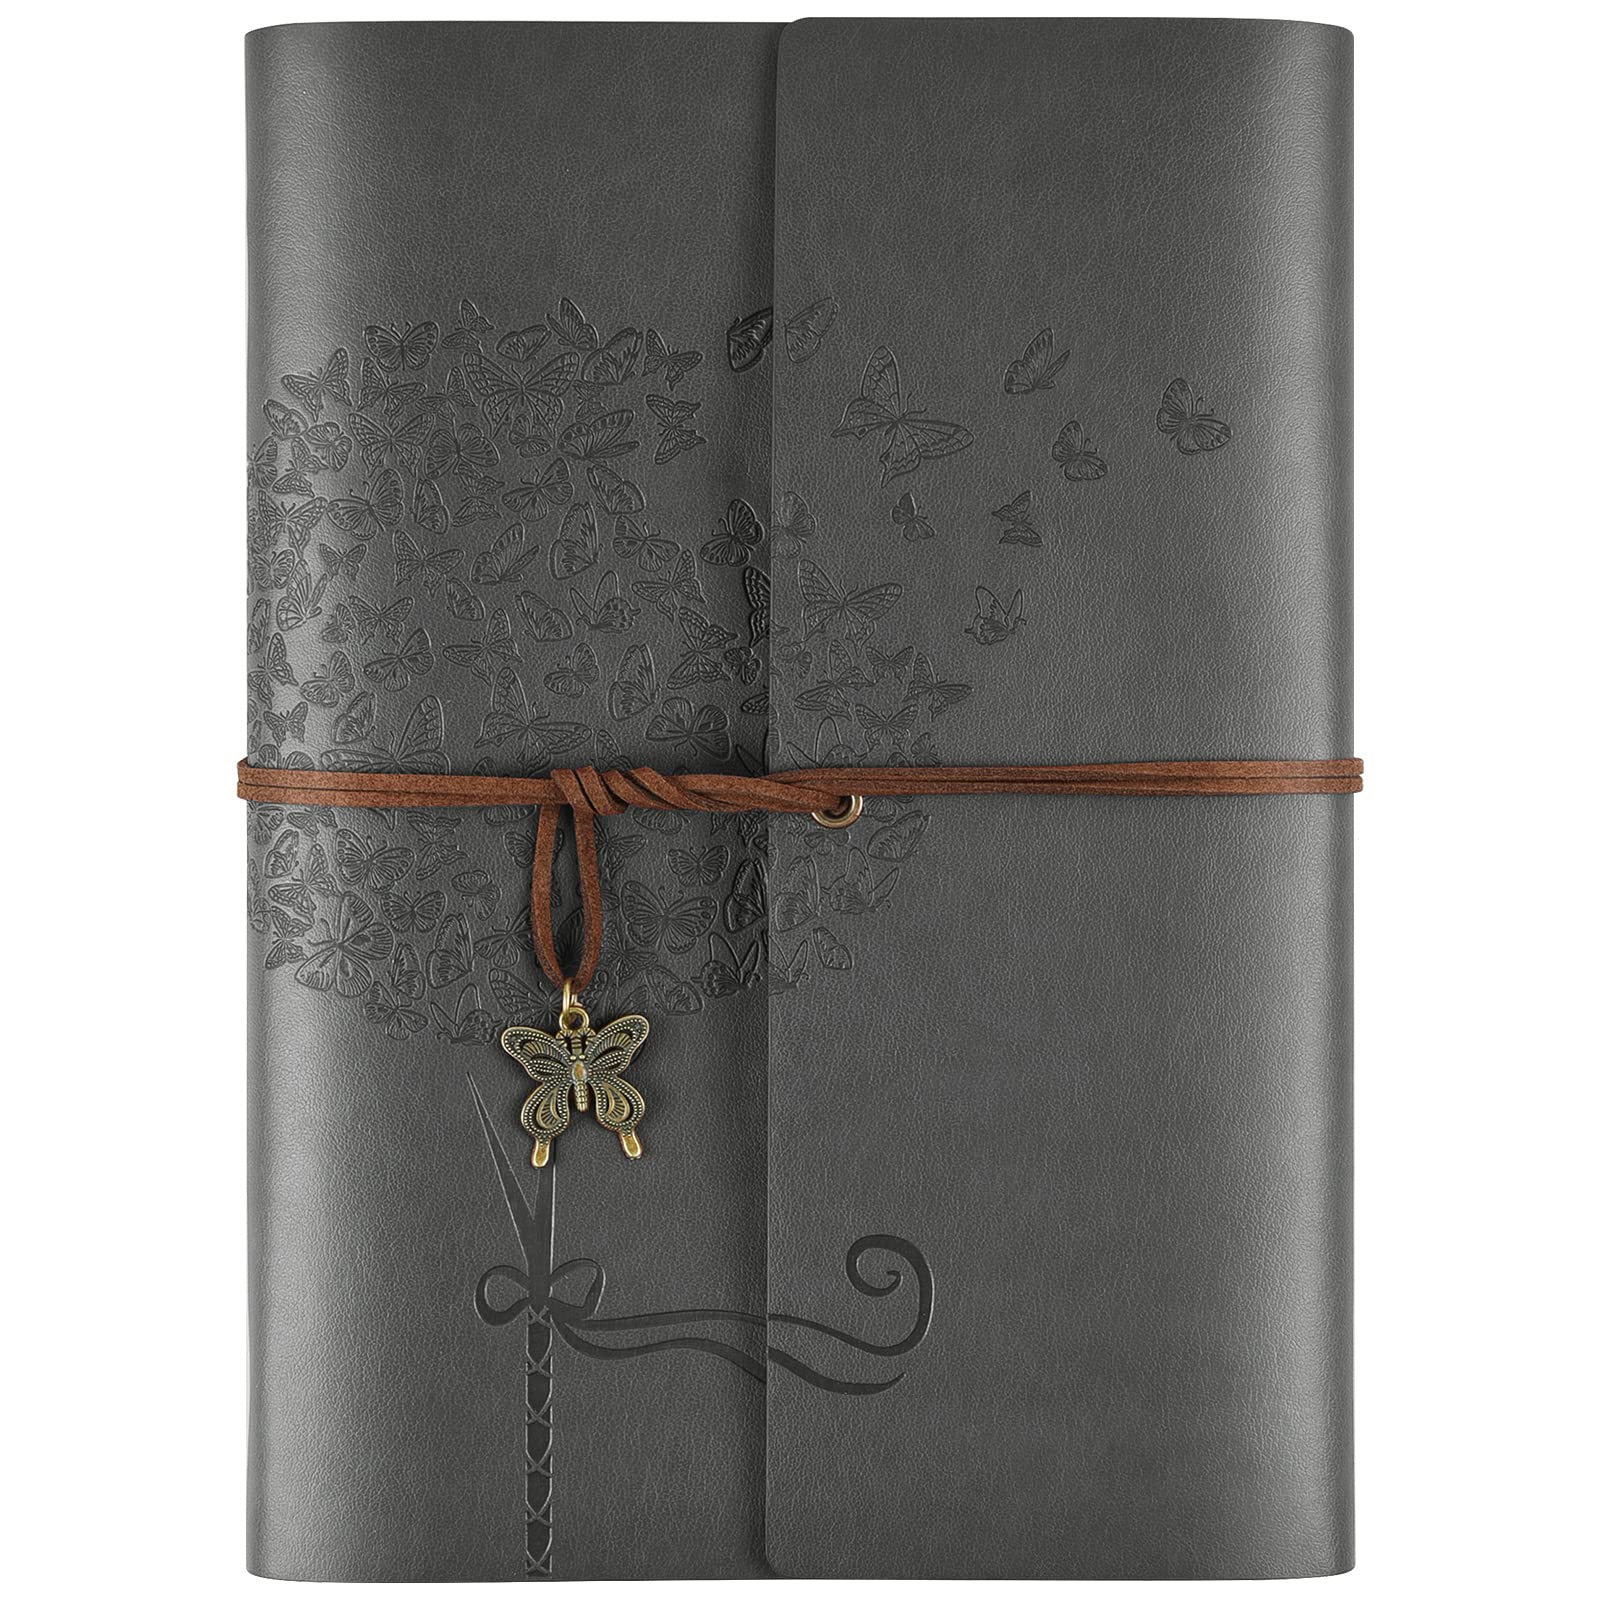 OMEYA Leather Journal Notebook, Refillable Writing Journal Diary Planner for Women girls, Ruled Travelers Journals to Wr